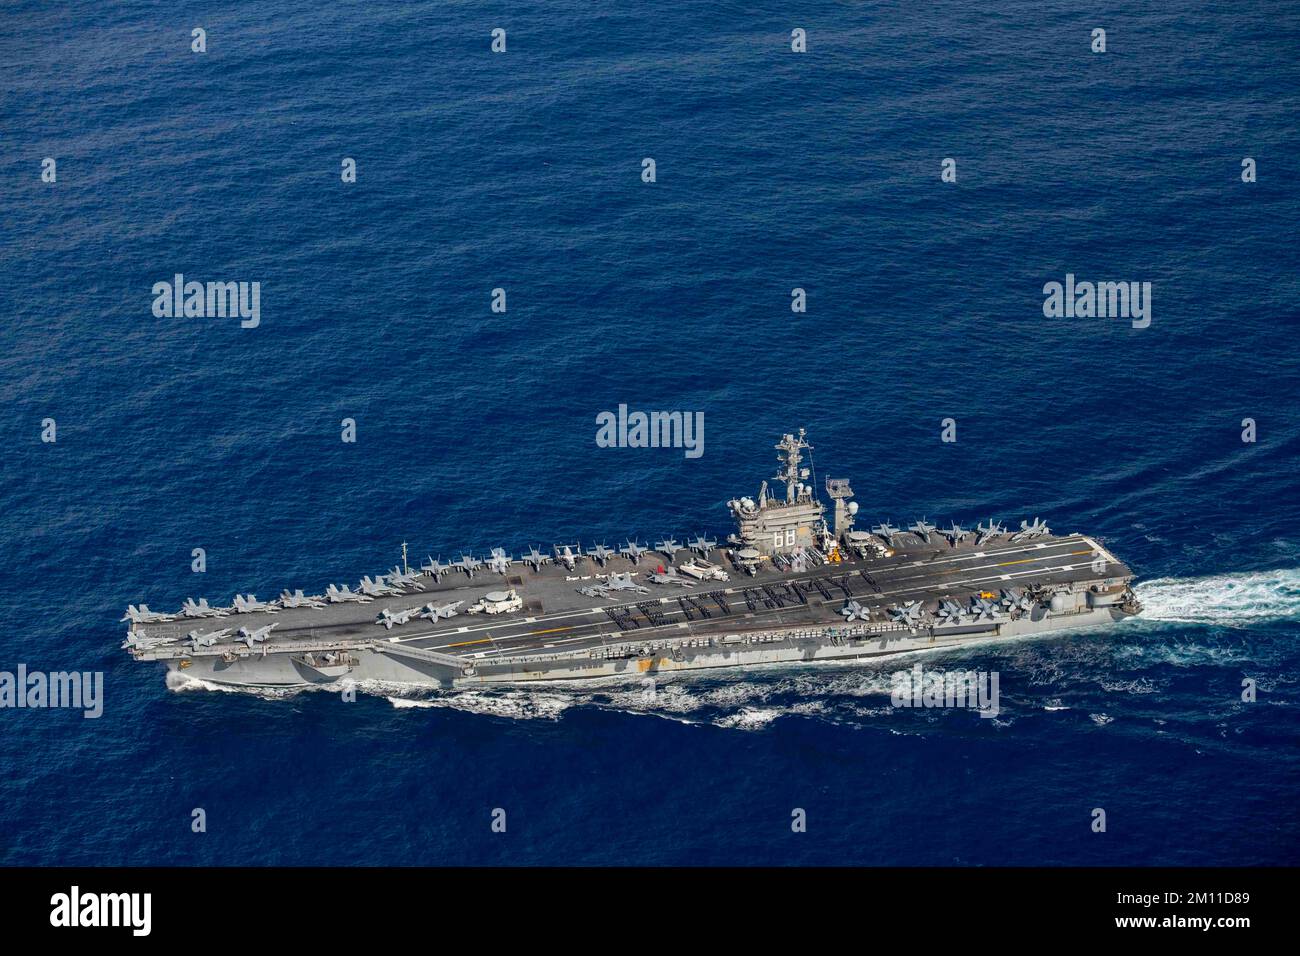 USS Nimitz, United States. 08th Dec, 2022. U.S. Navy sailors form the phrase “Beat Army” on the flight deck of the Nimitz-class aircraft carrier USS Nimitz in support of the annual Army vs Navy football game, December 8, 2022 on the Pacific Ocean. The traditional college football rivalry between the Army Black Knights and Navy Midshipman is scheduled for December 10th. Credit: MC3 Samuel Osborn/U.S. Navy/Alamy Live News Stock Photo